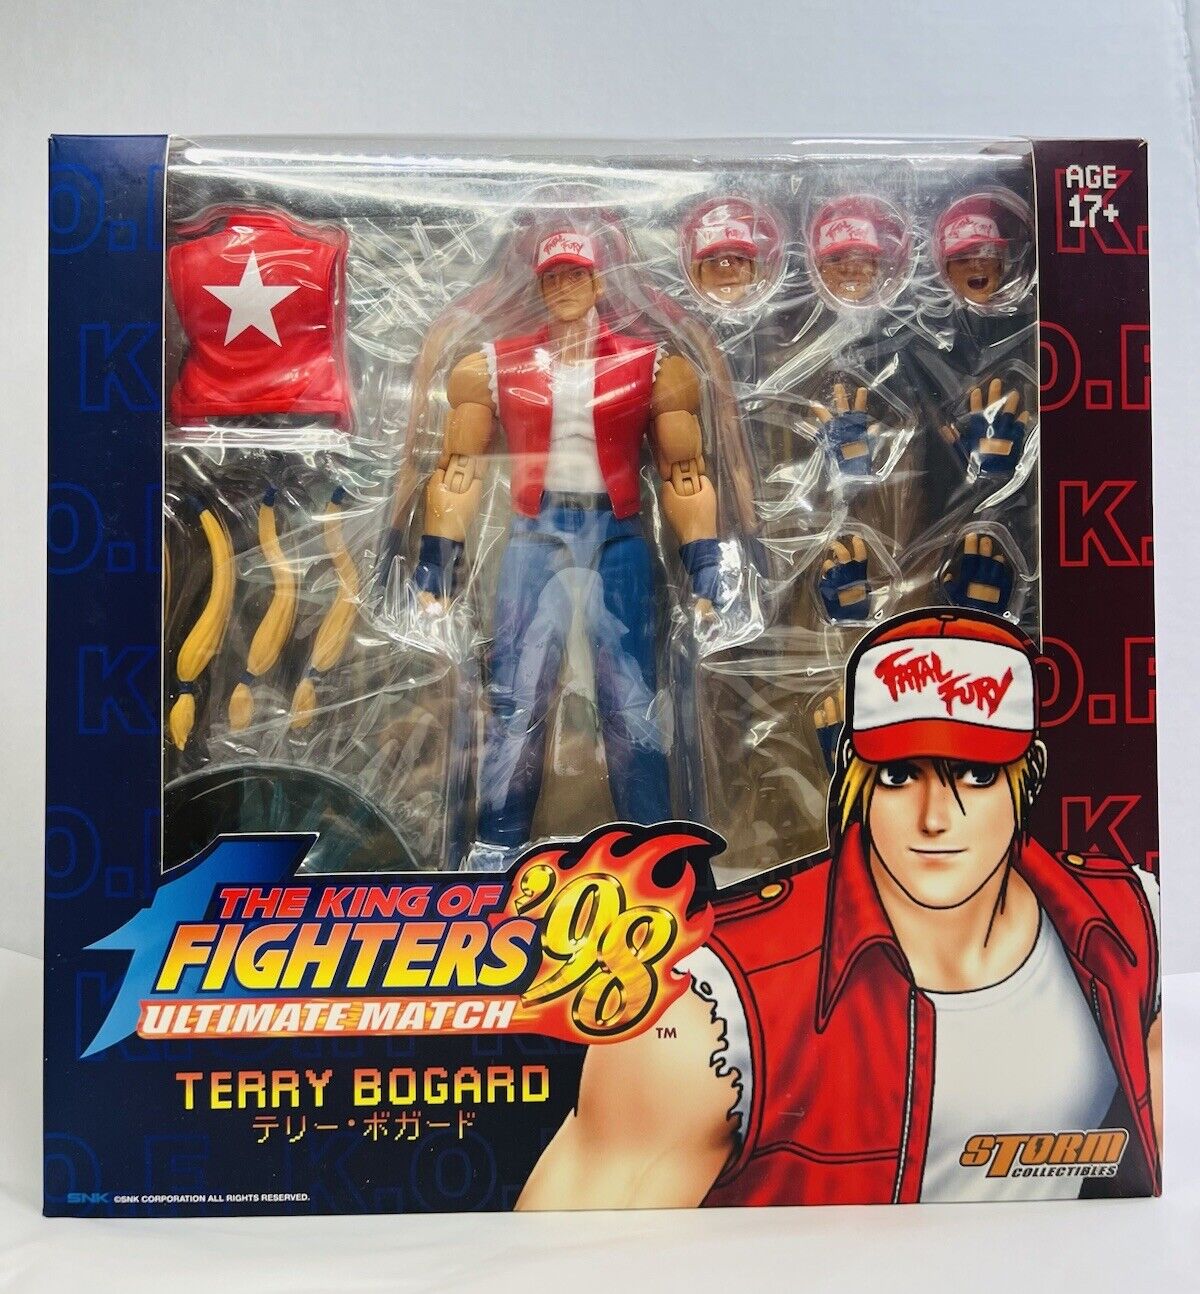 STORM COLLECTIBLES The King of Fighters Ultimate Match Terry Bogard US SELLER